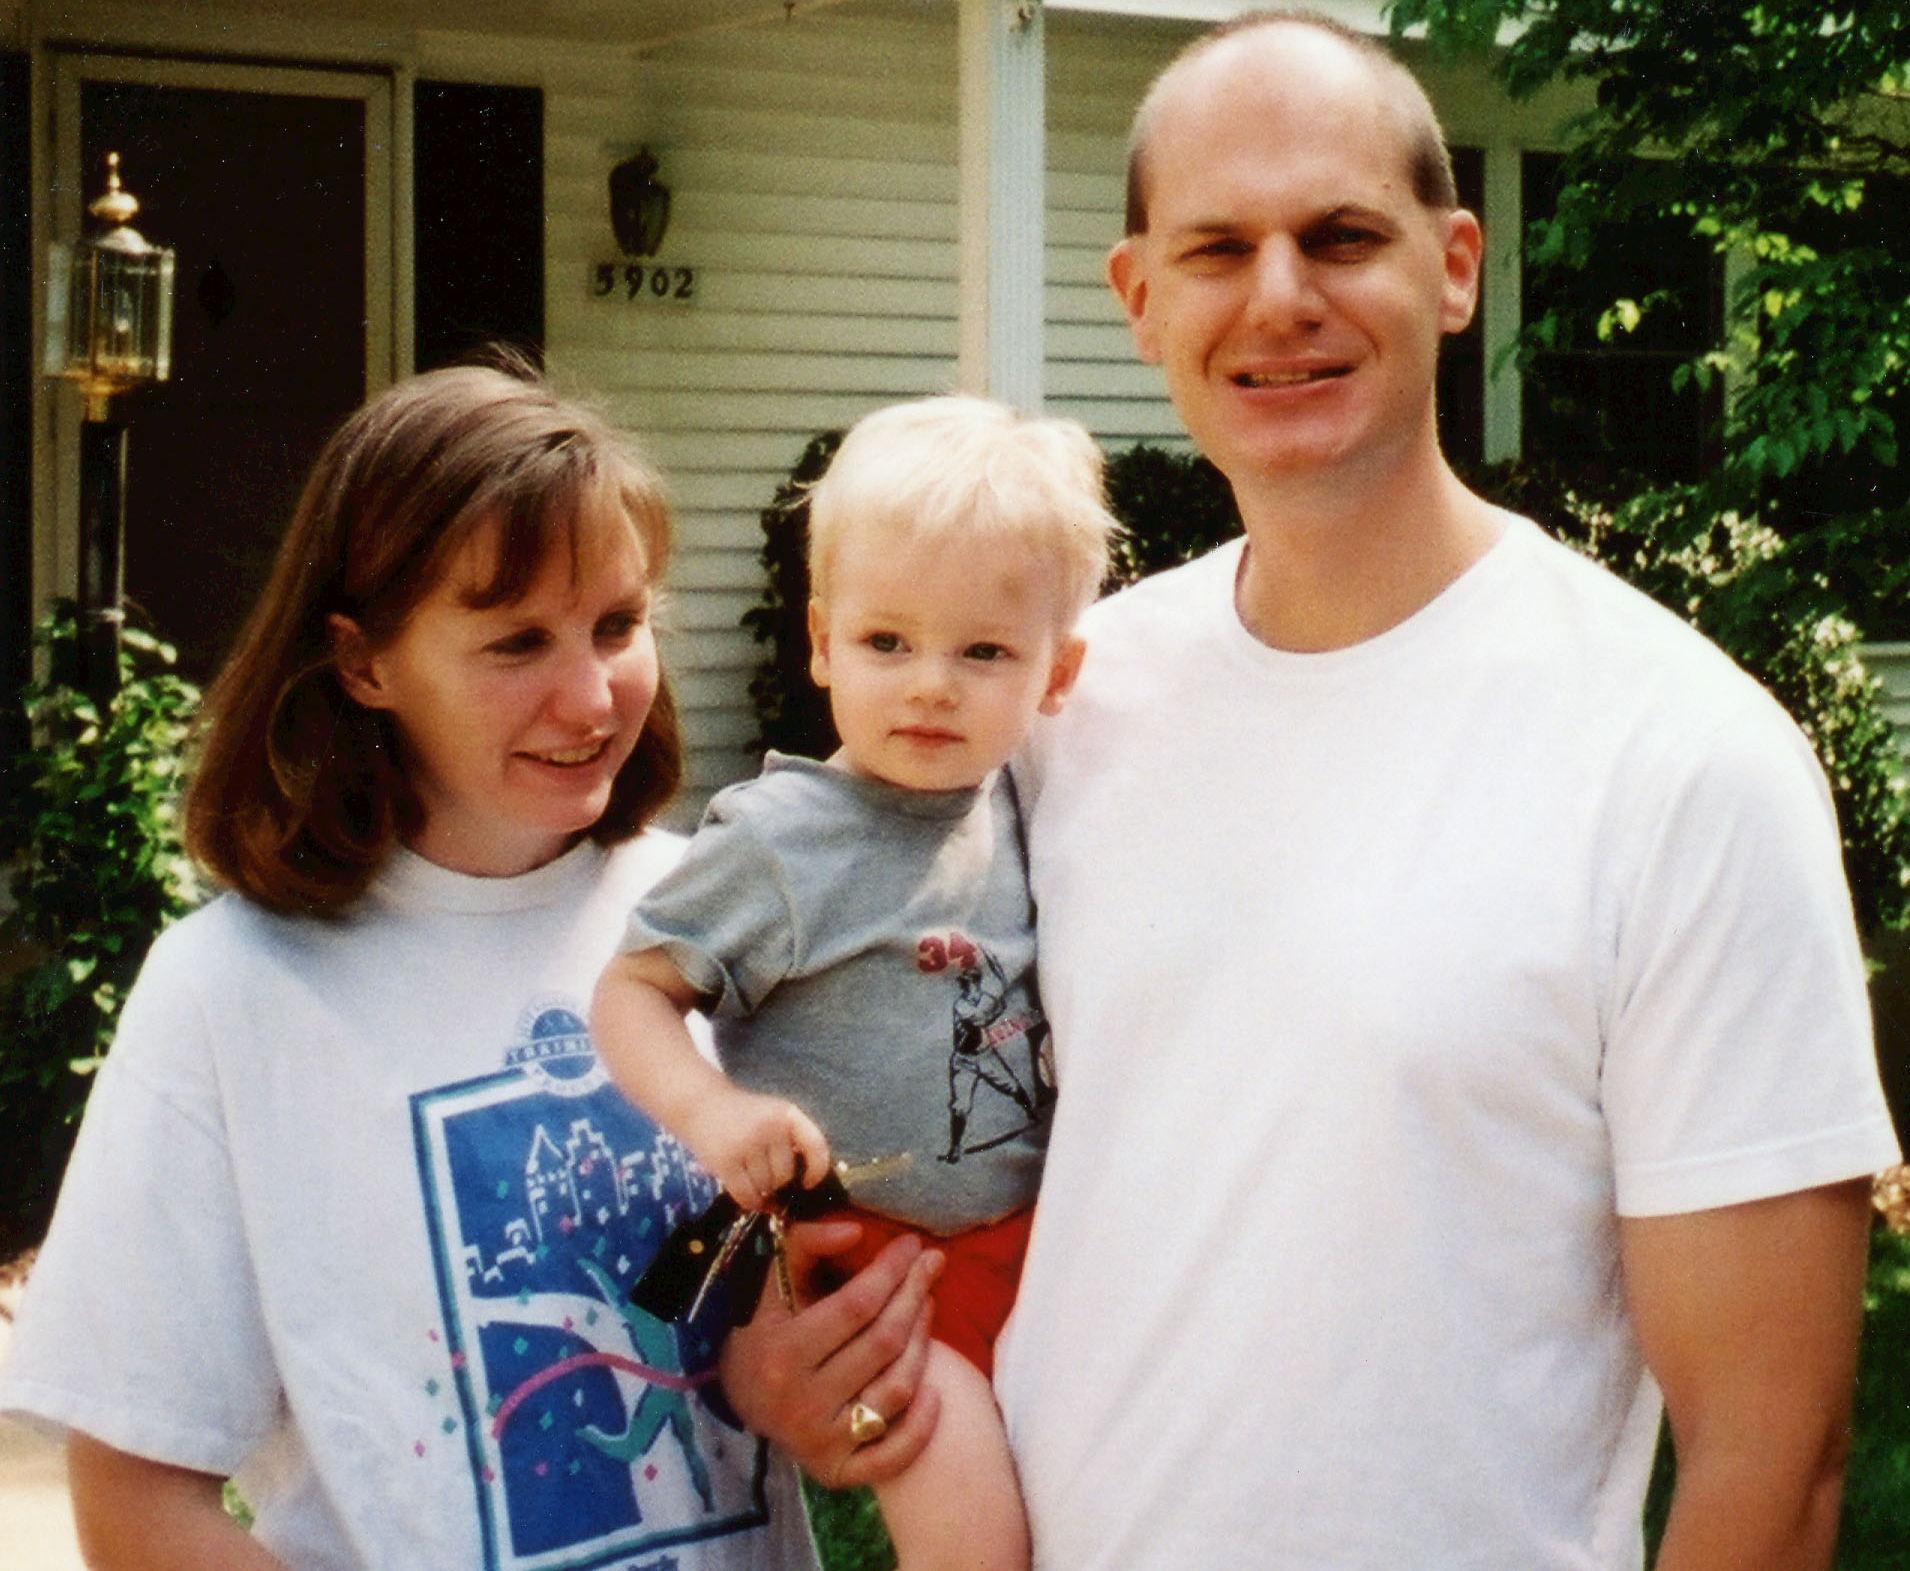 The author, Tom Mayer, his wife Laura and young son Liam